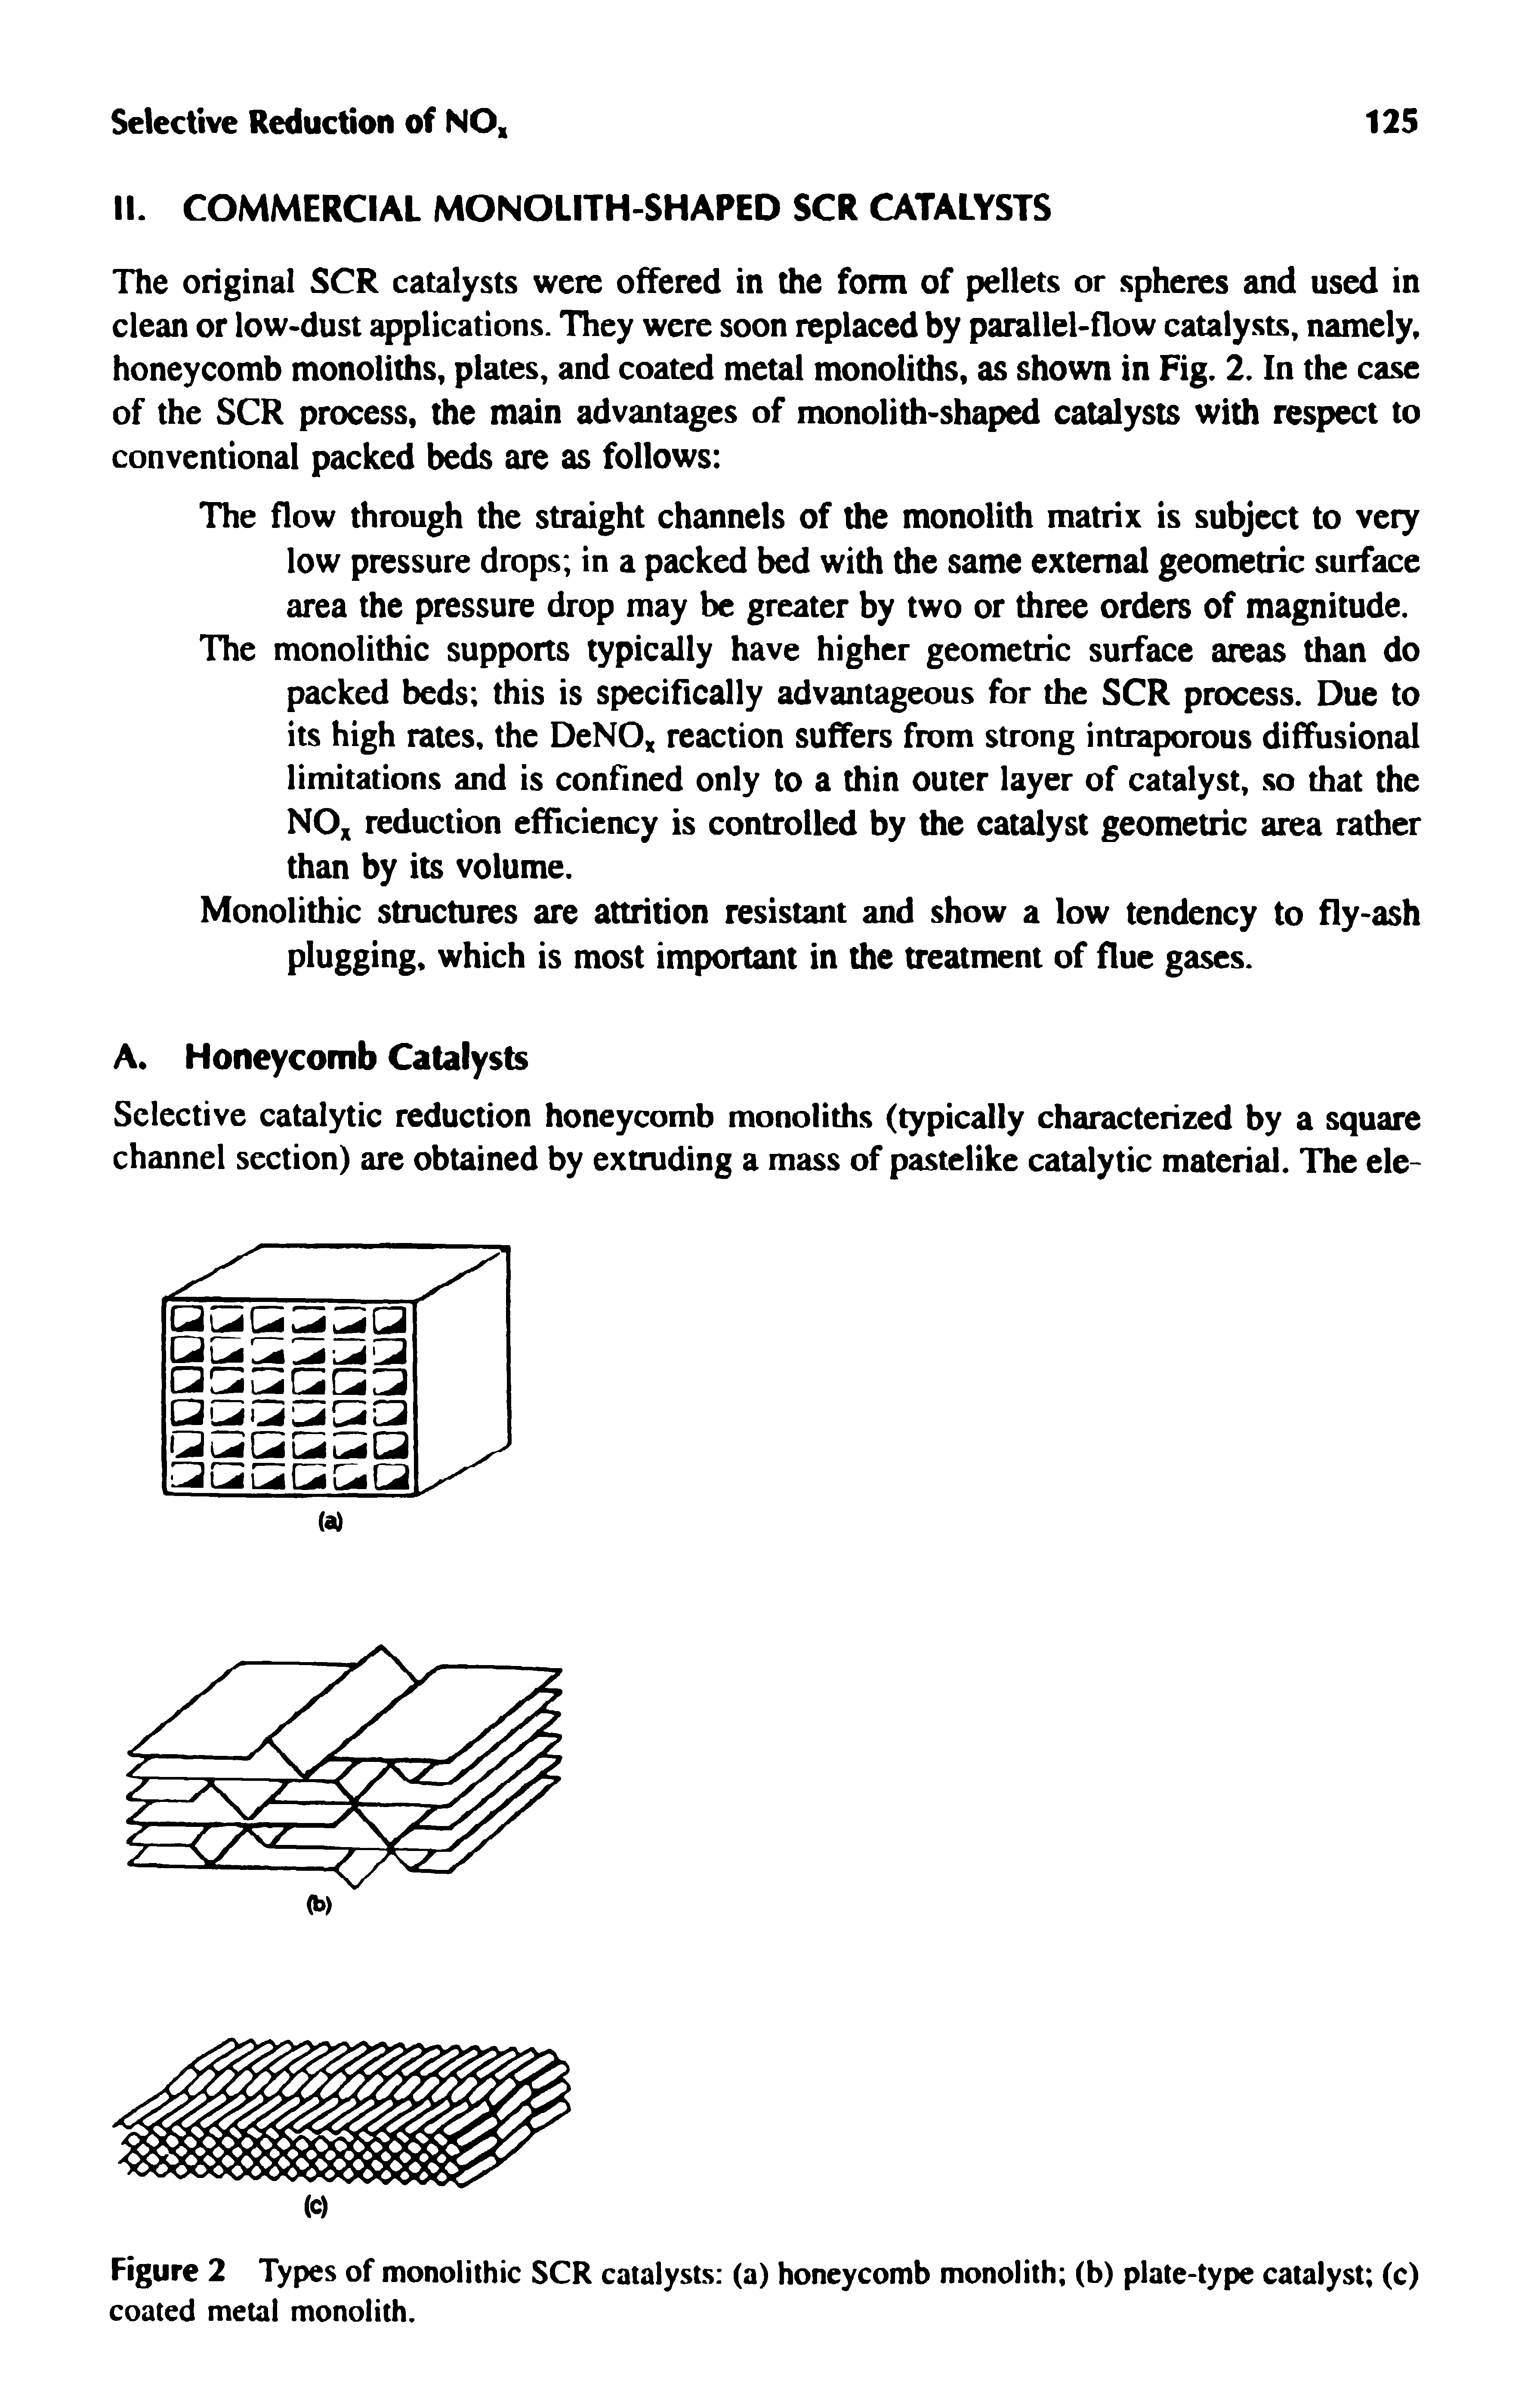 Figure 2 Types of monolithic SCR catalysts (a) honeycomb monolith (b) plate-type catalyst (c) coated metal monolith.